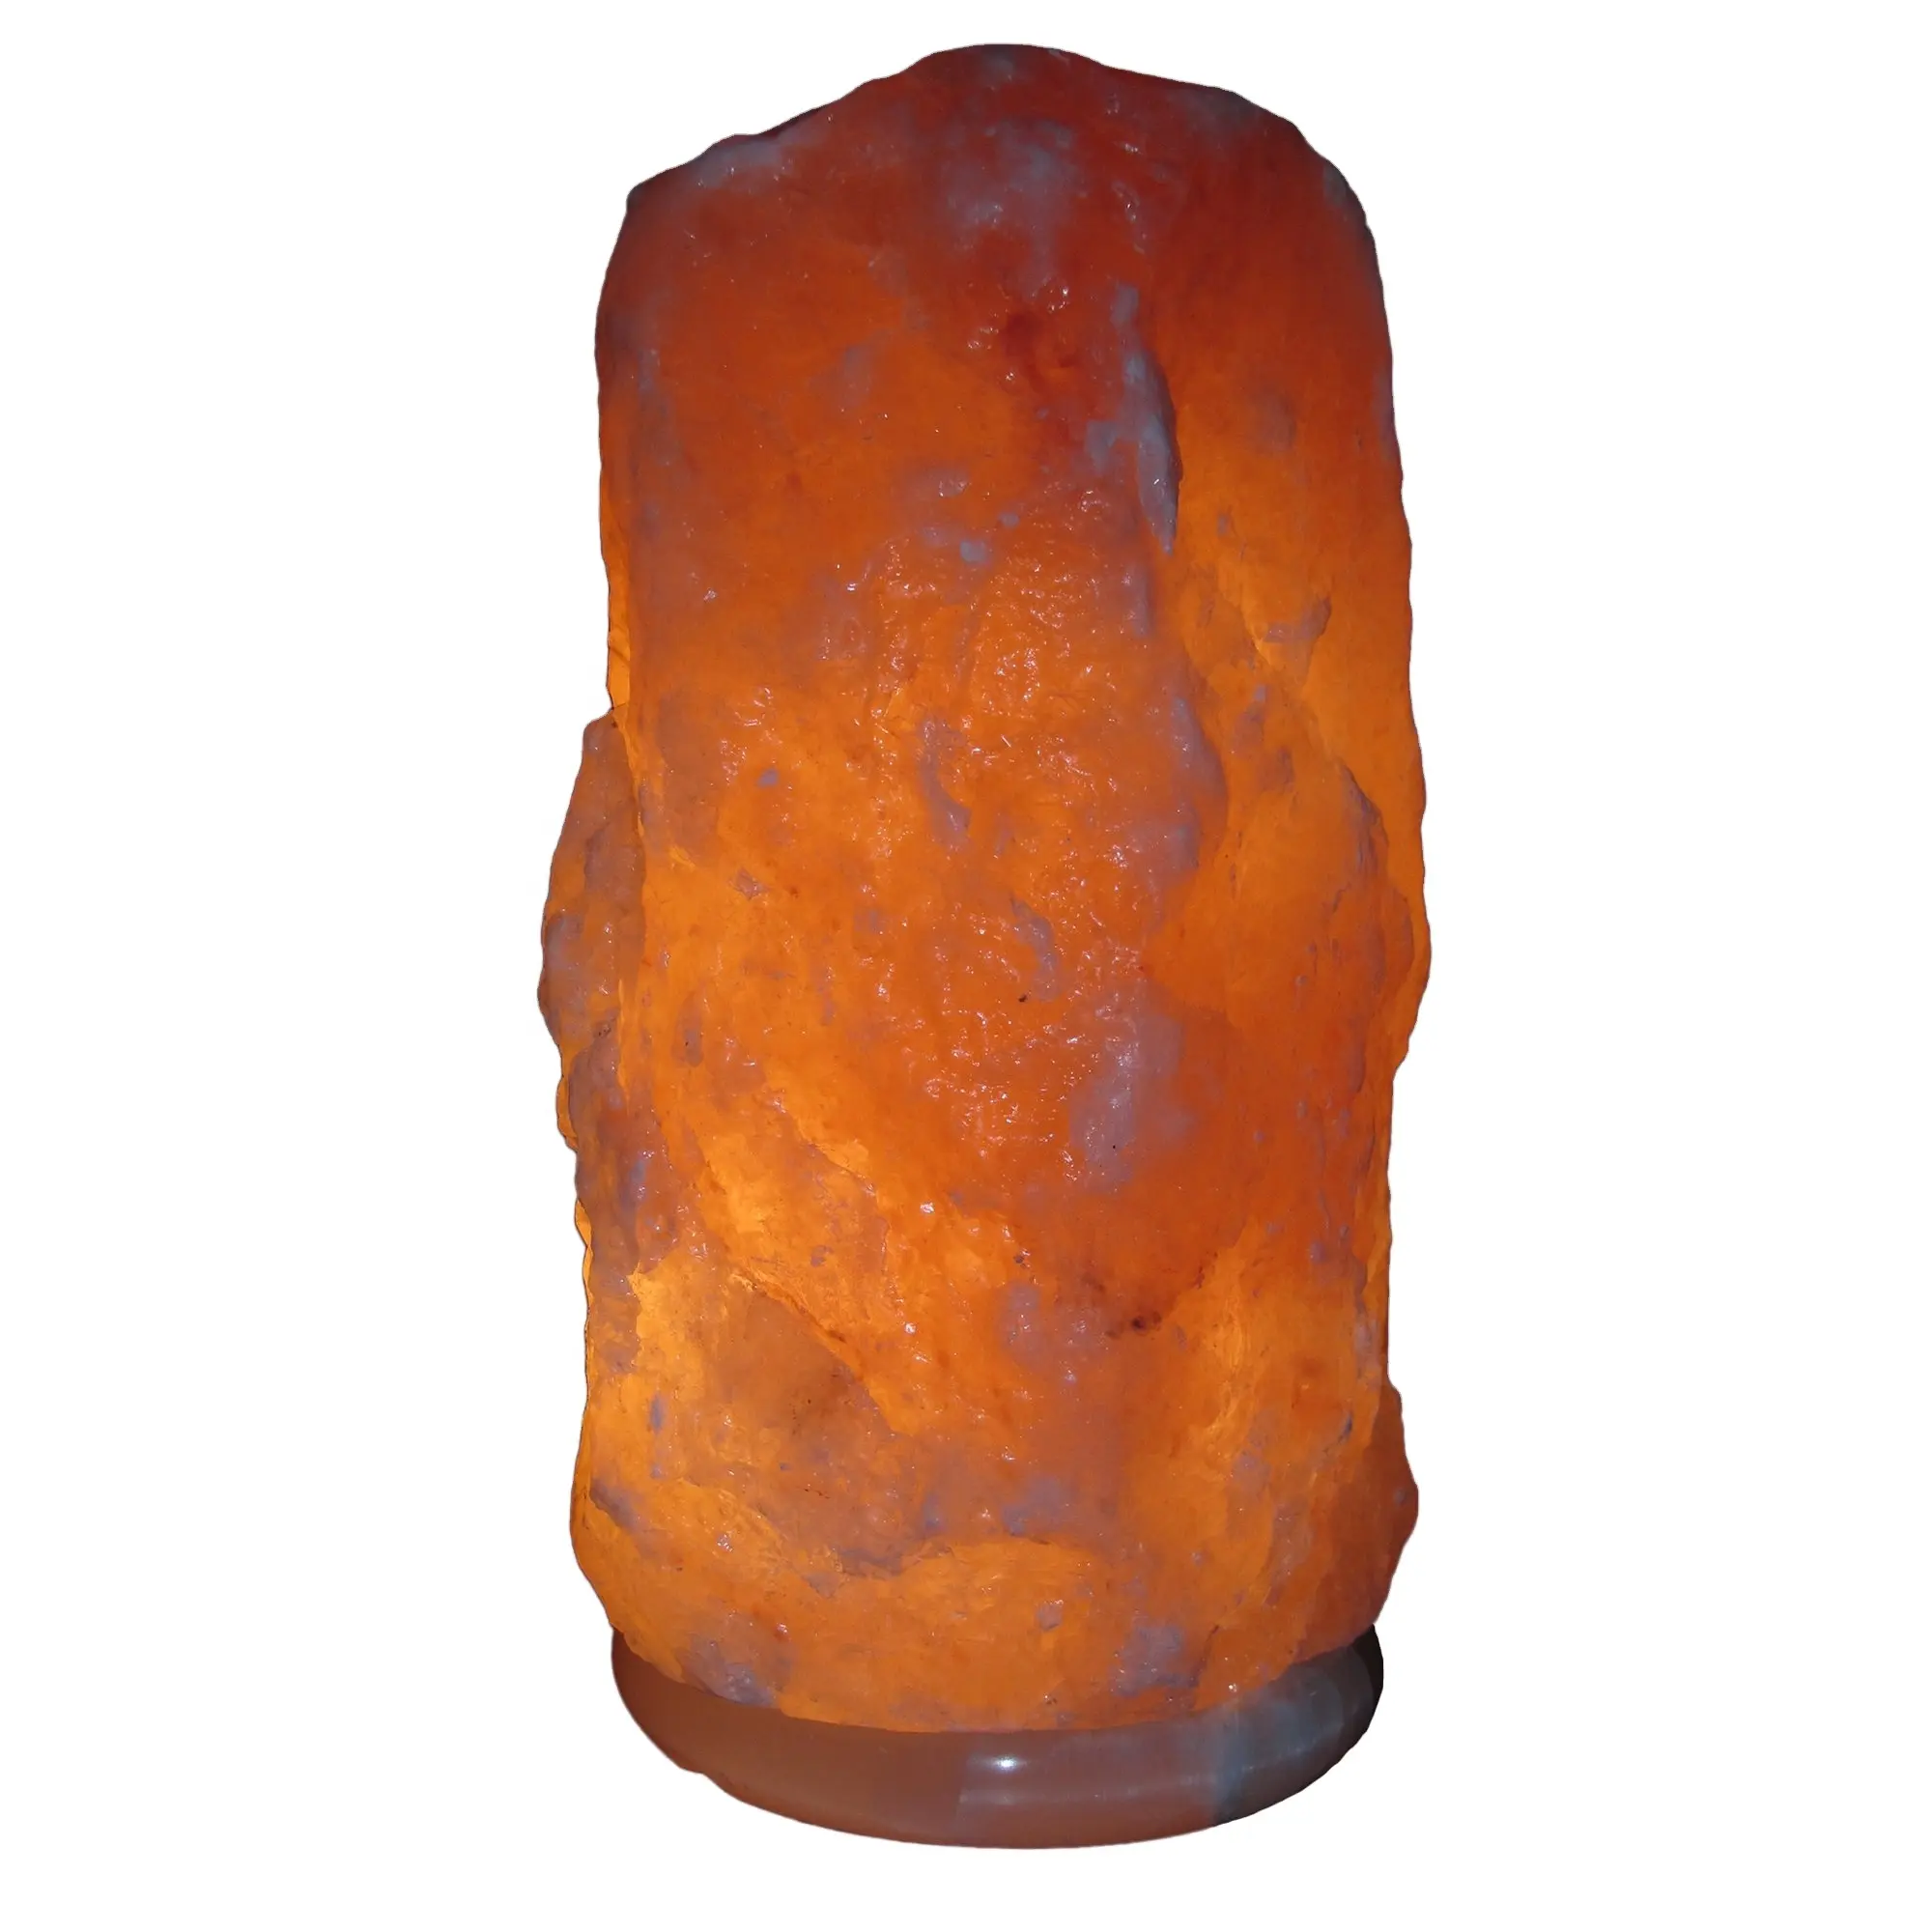 Himalayan Salt Natural Crystal Lamp Tall Soft Calm Therapeutic Light Naturally Formed Salt Crystal Design On Onyx Marble Base